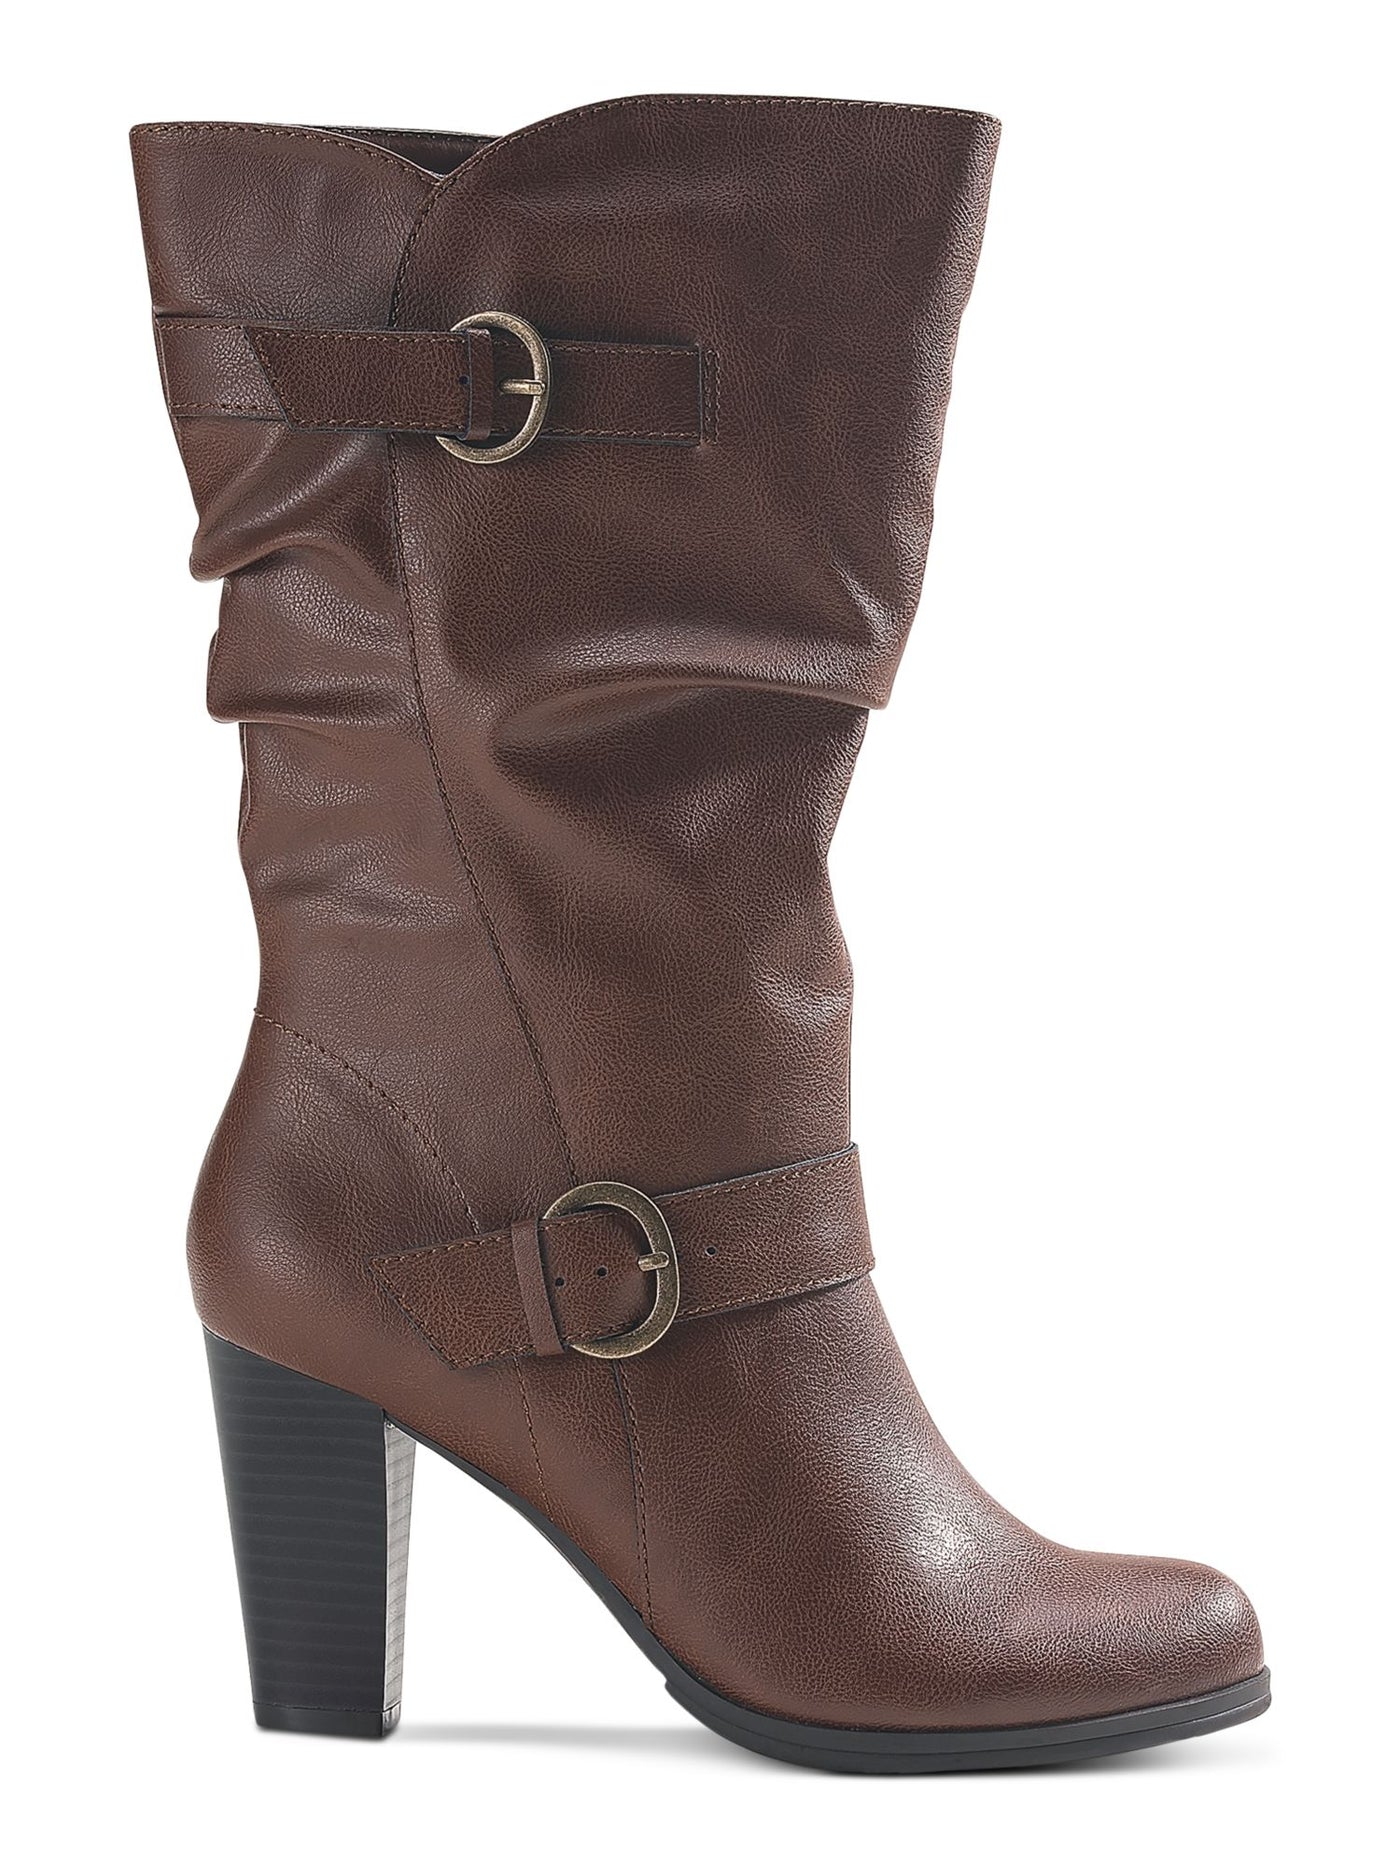 STYLE & COMPANY Womens Brown Slouchy Buckle Accent Almond Toe Block Heel Zip-Up Heeled Boots 10.5